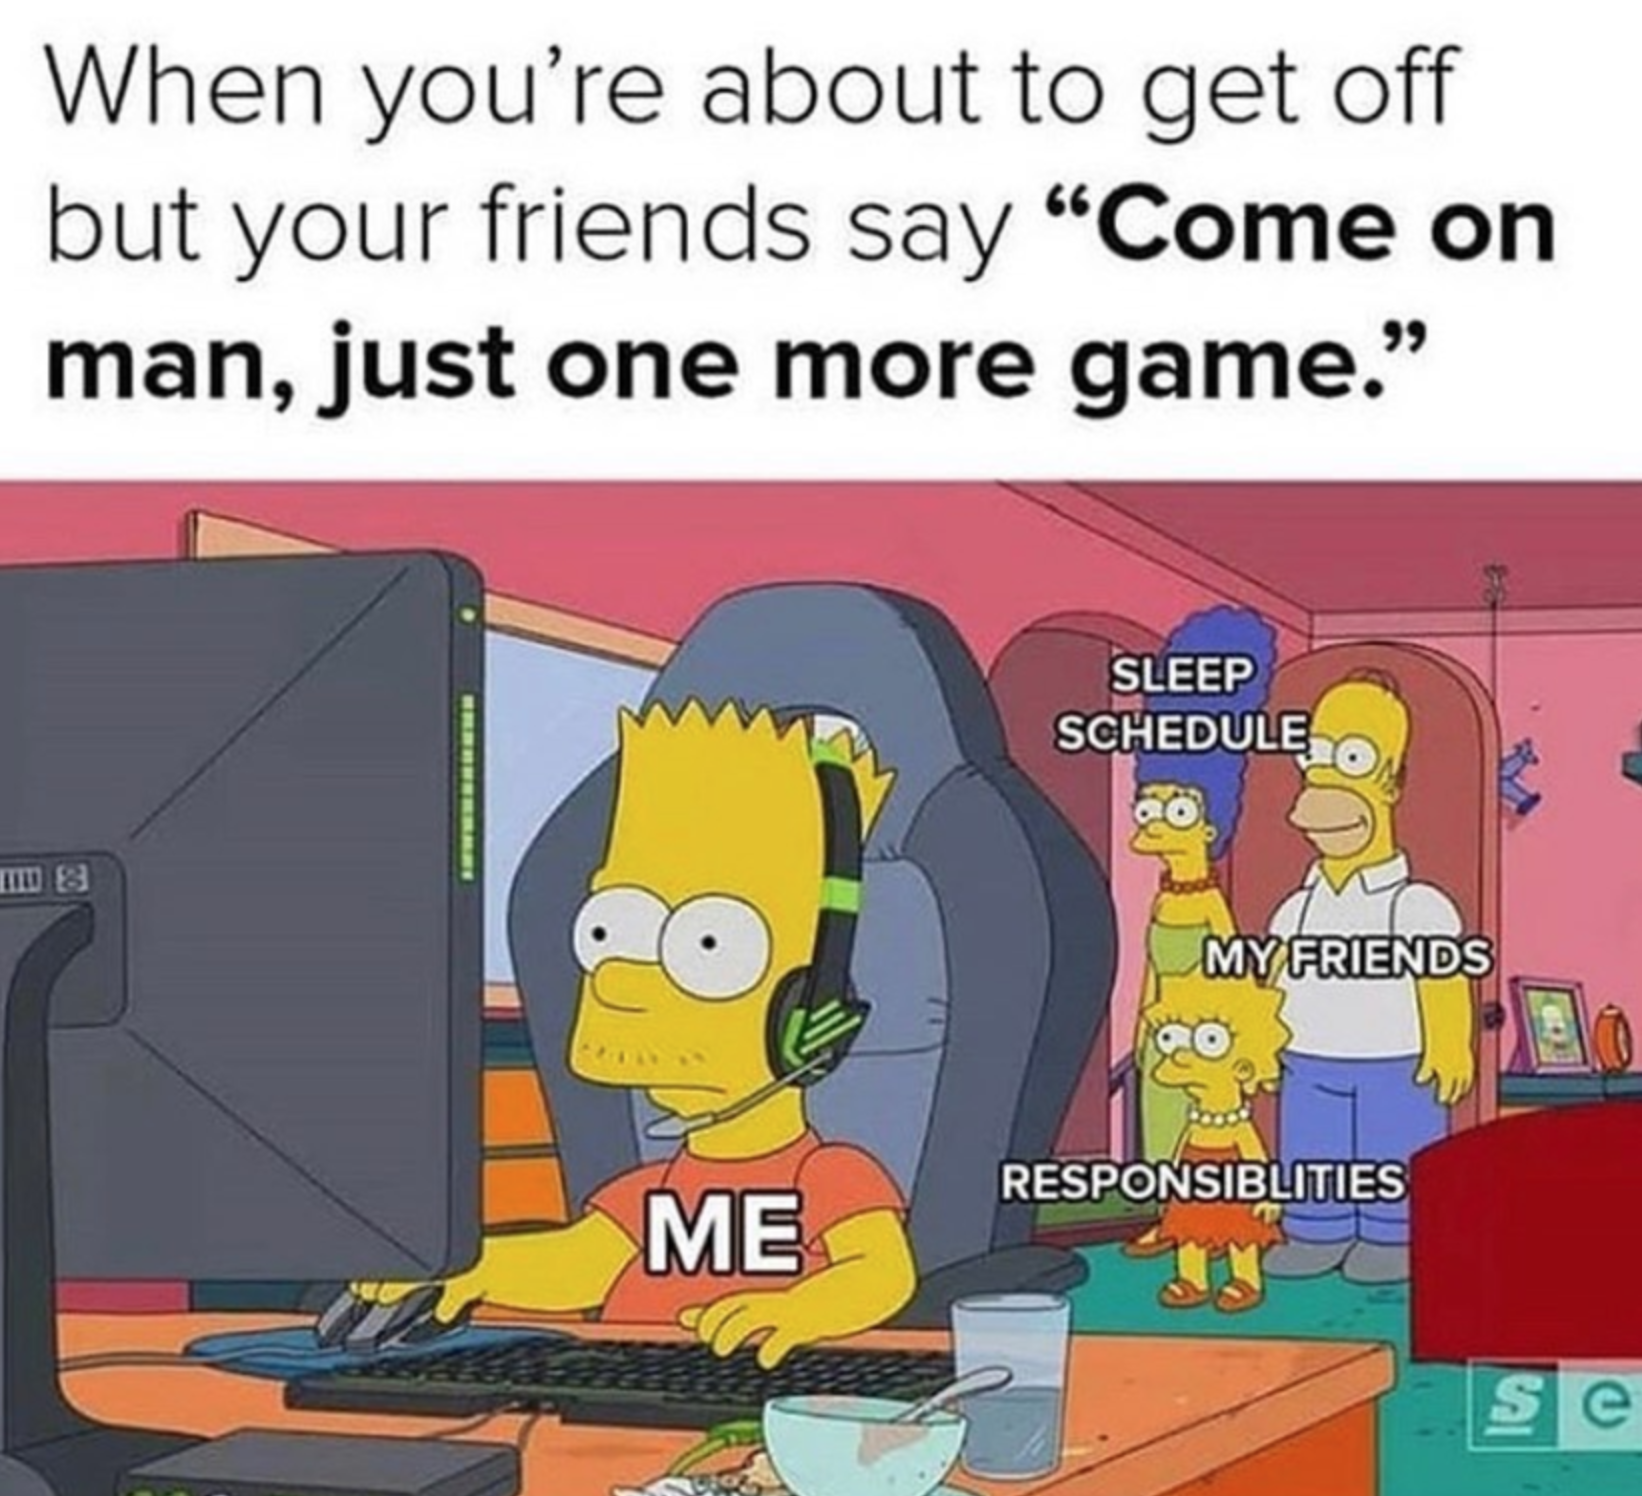 funny gaming memes - bart simpson esports gaming - When you're about to get off but your friends say "Come on man, just one more game." Sleep Schedule Oo Td My Friends Responsiblities Me Se